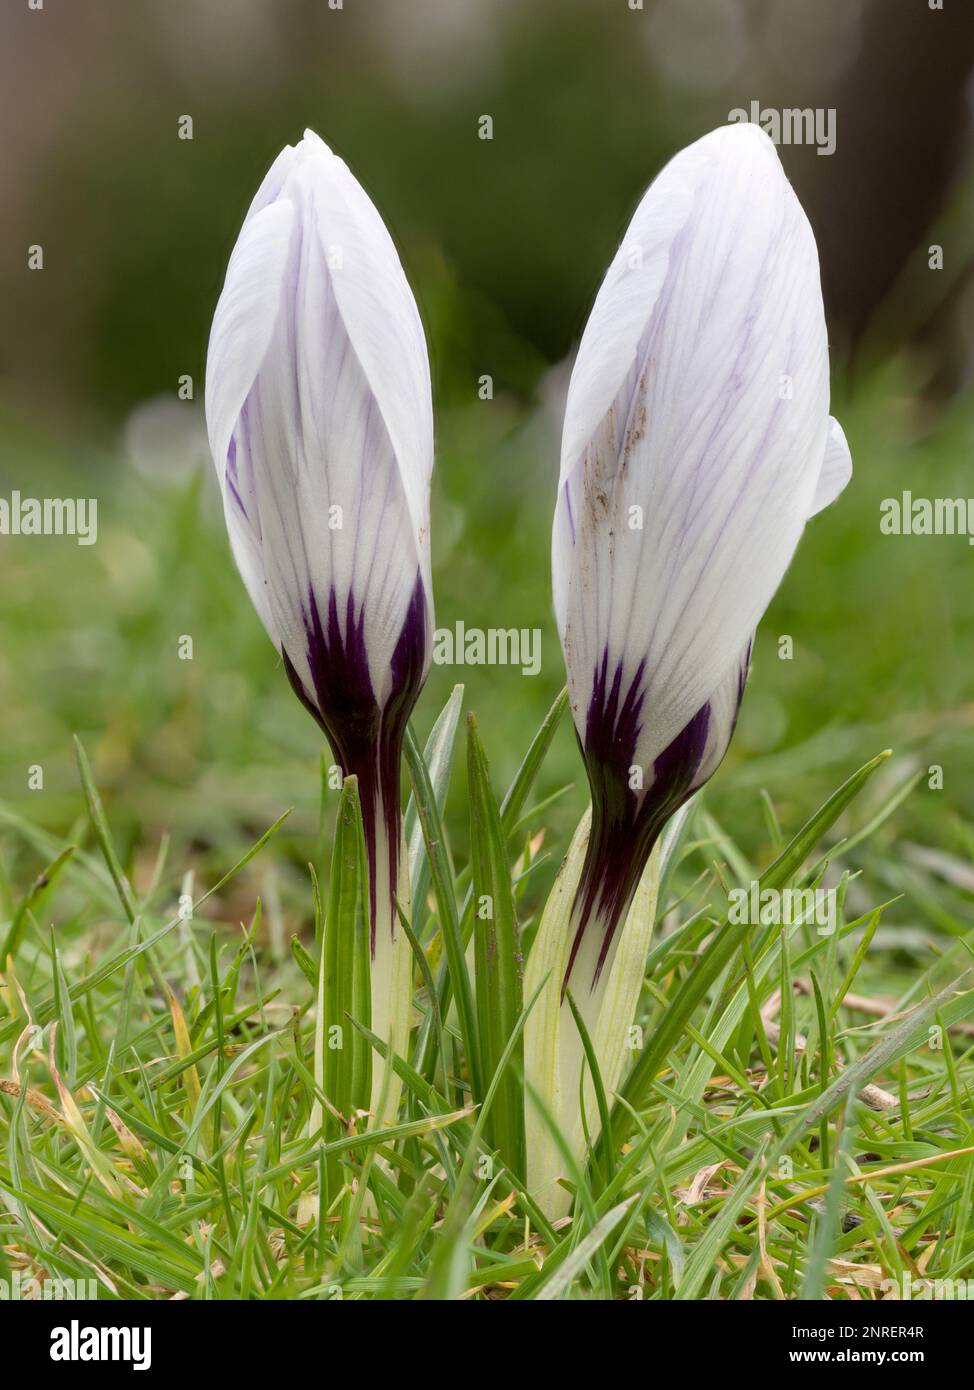 A pair of white Crocuses growing amongst grass Stock Photo